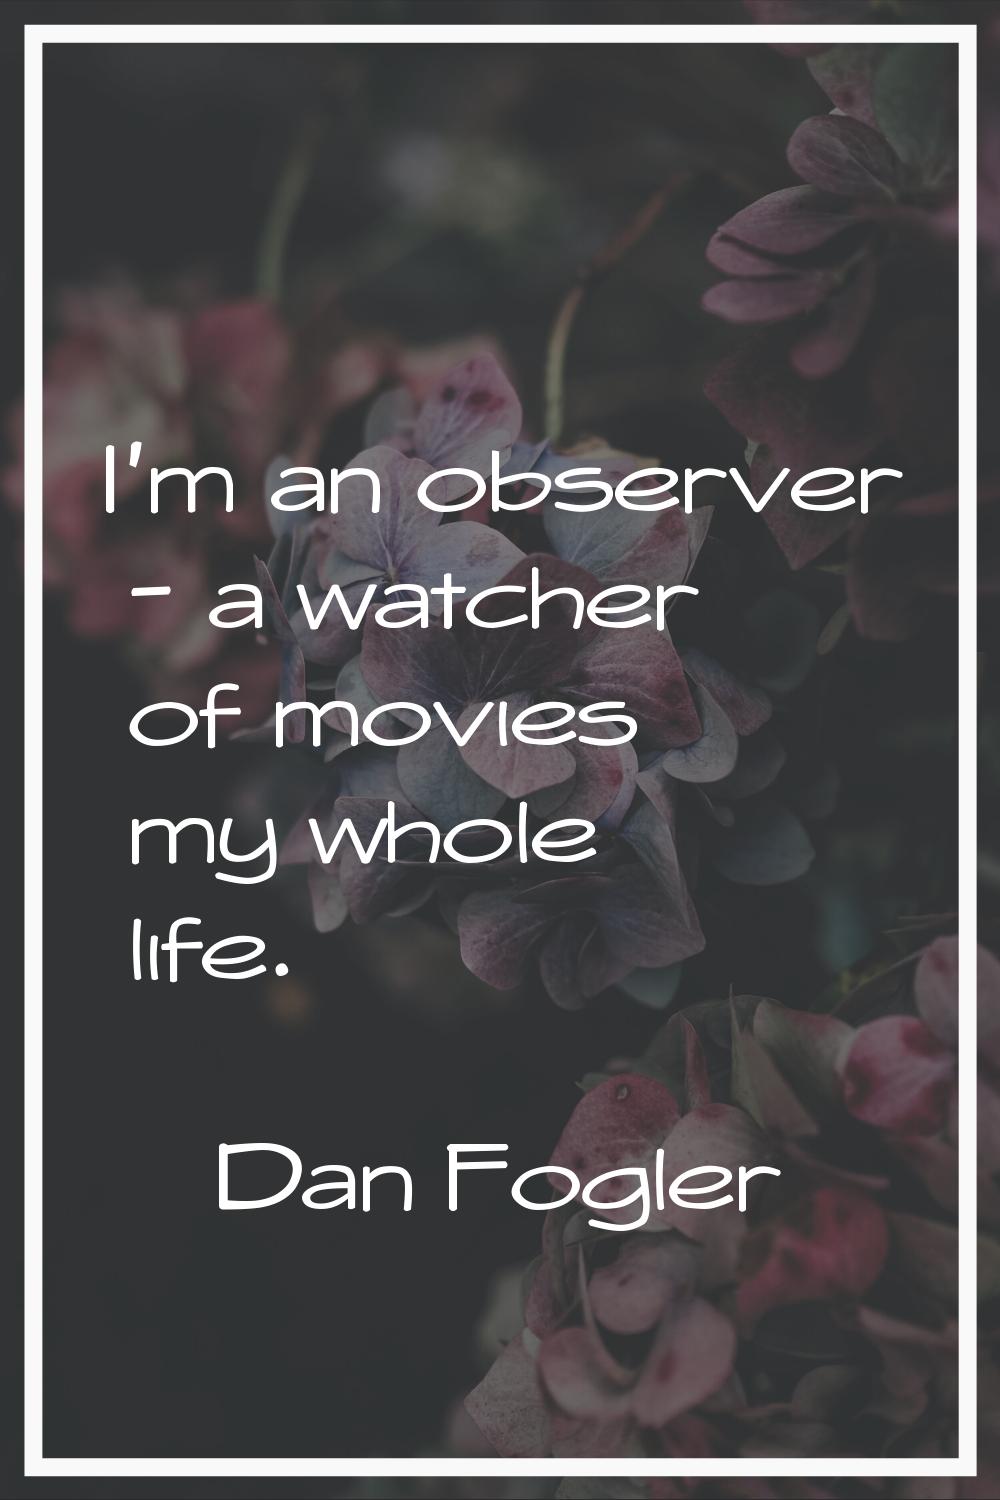 I'm an observer - a watcher of movies my whole life.